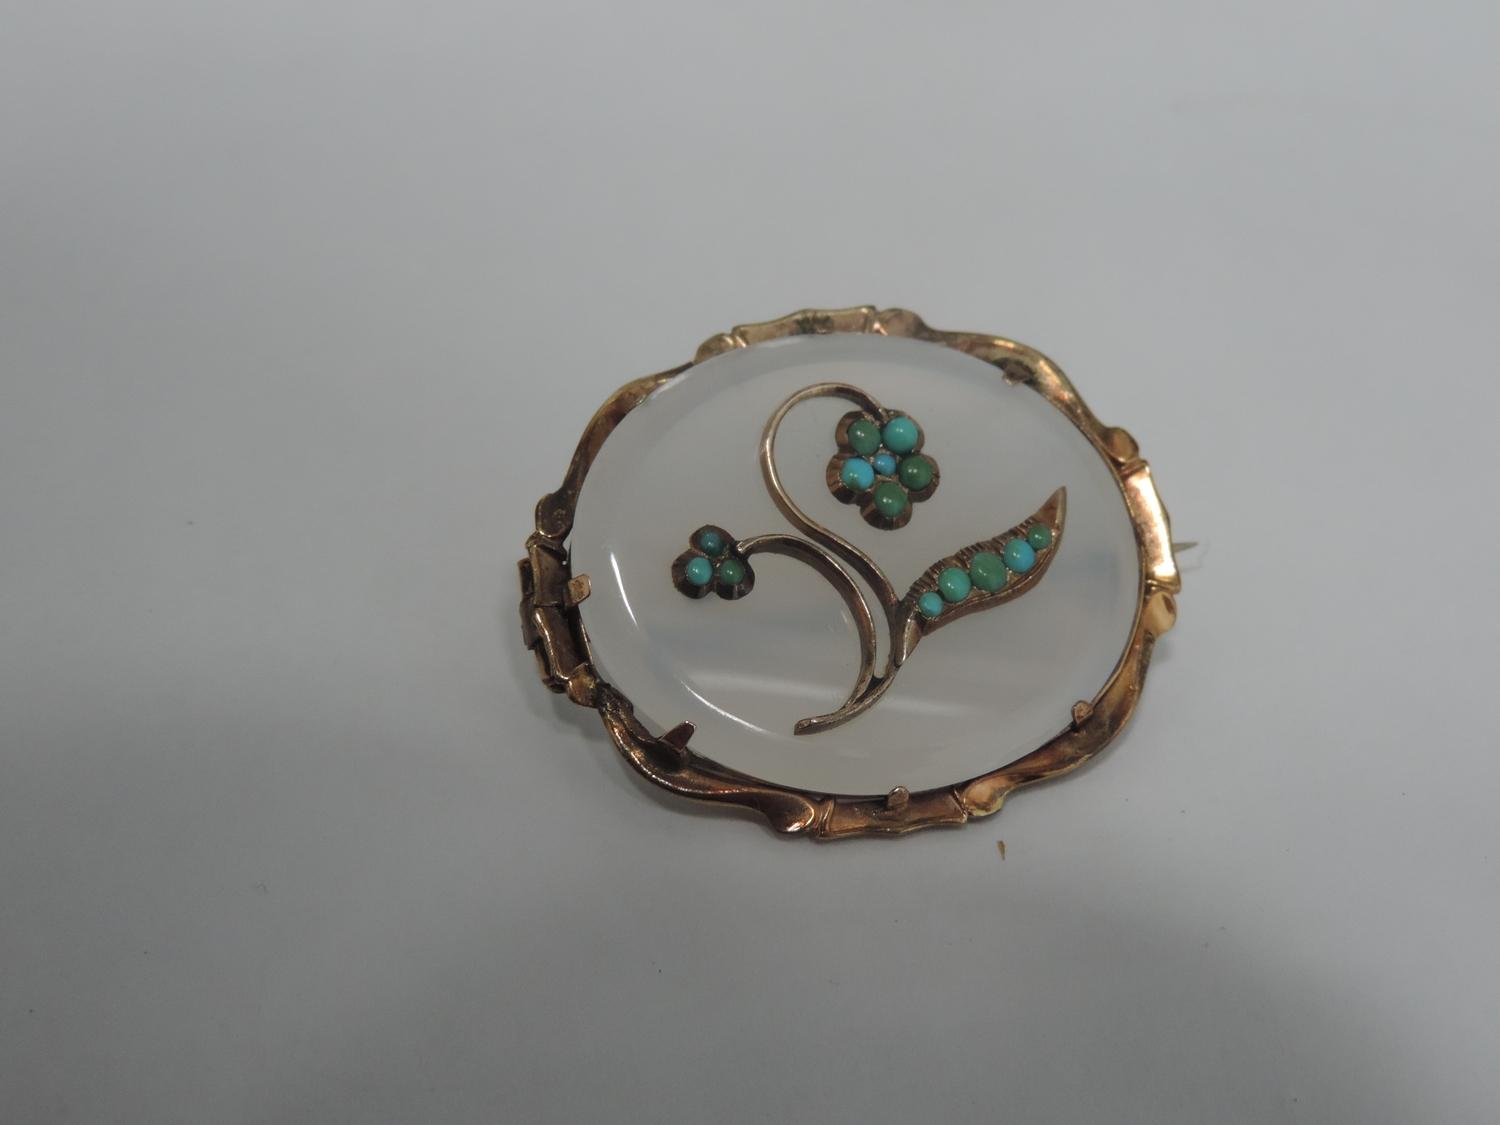 Unmarked Gold Chalcedony Brooch Set with Turquoise in Floral Design - Image 3 of 3